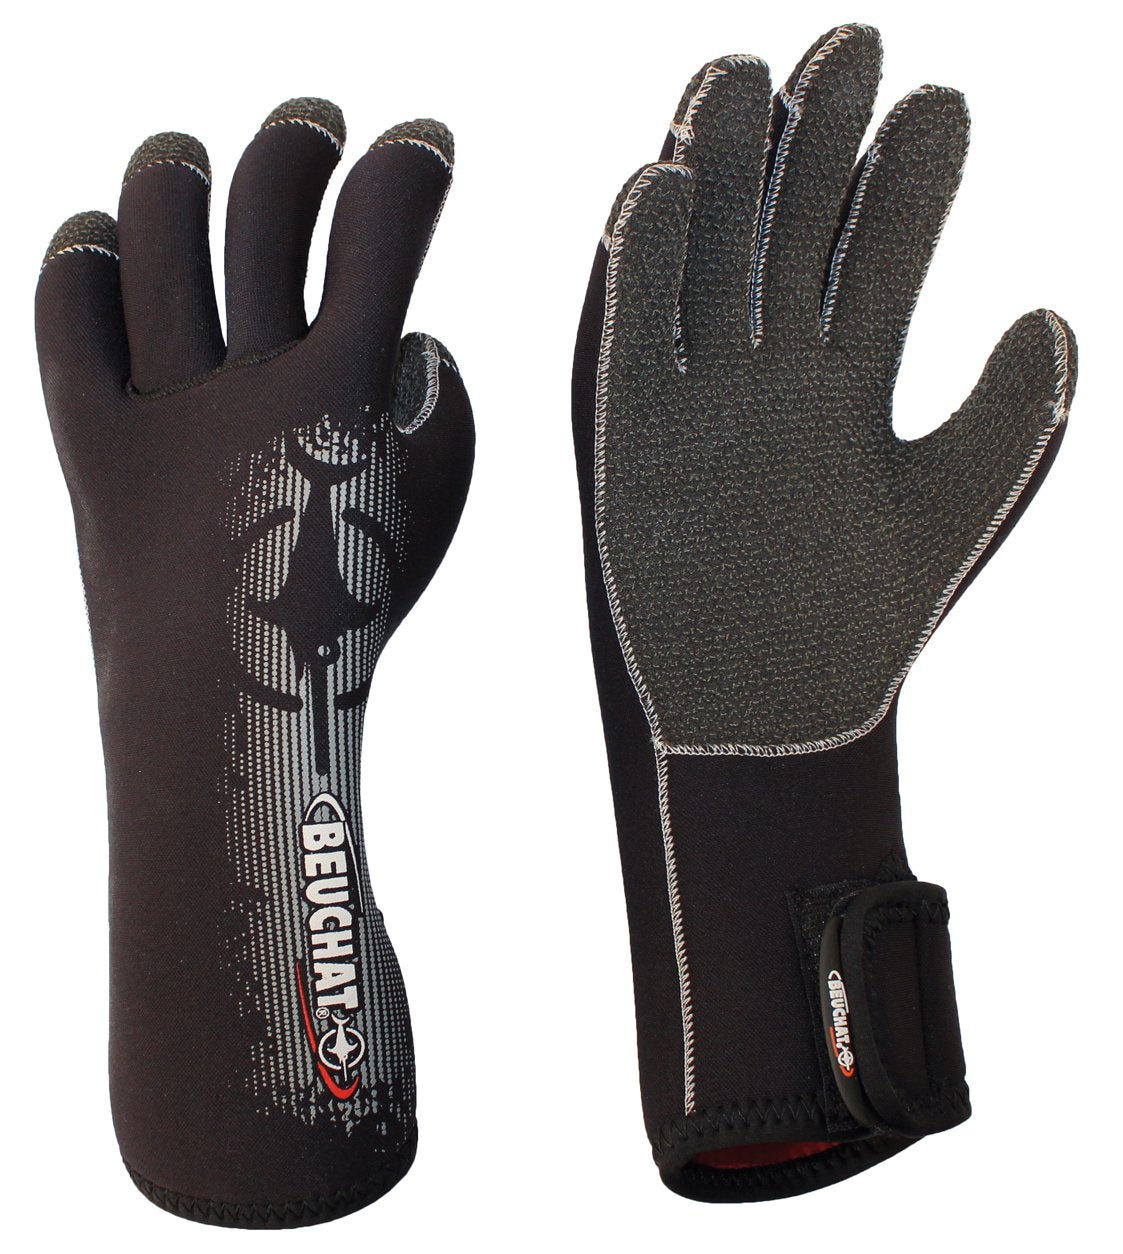 Beuchat Premium Gloves 4.5mm - Spearfishing Experts